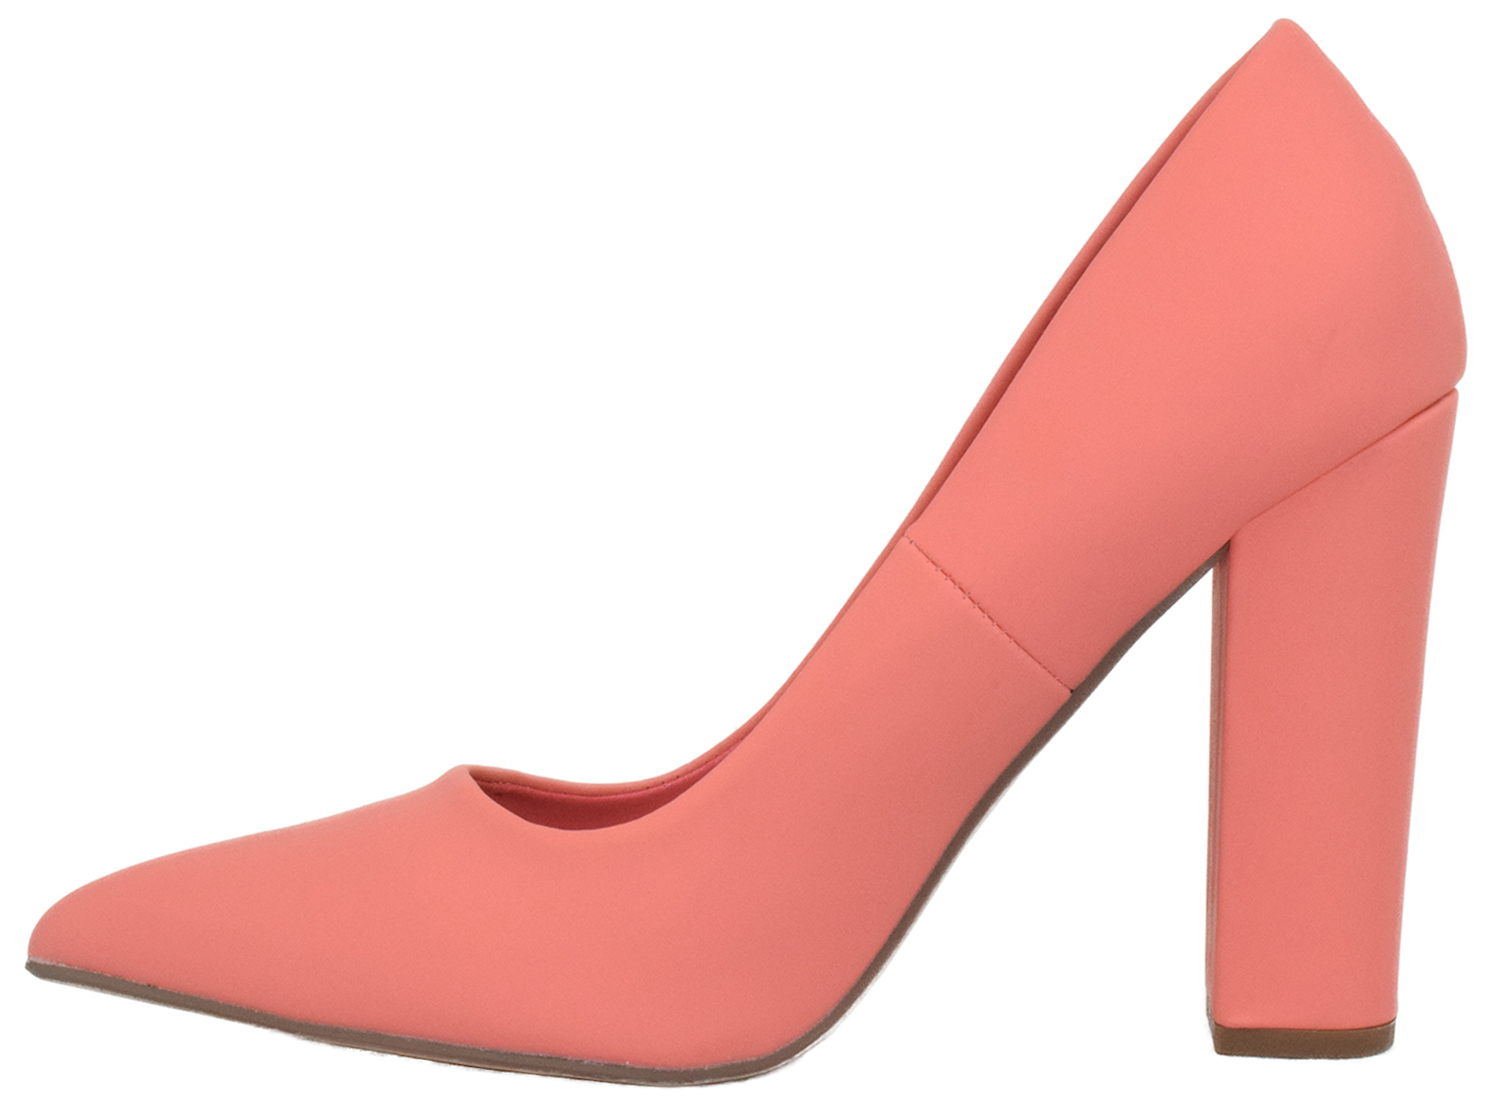 Not Just A Pump Women Thick Chunky Block High Heels Pointed Toe Dress / Casual Shoes OGDEN-S Pink Coral 9 - image 2 of 2